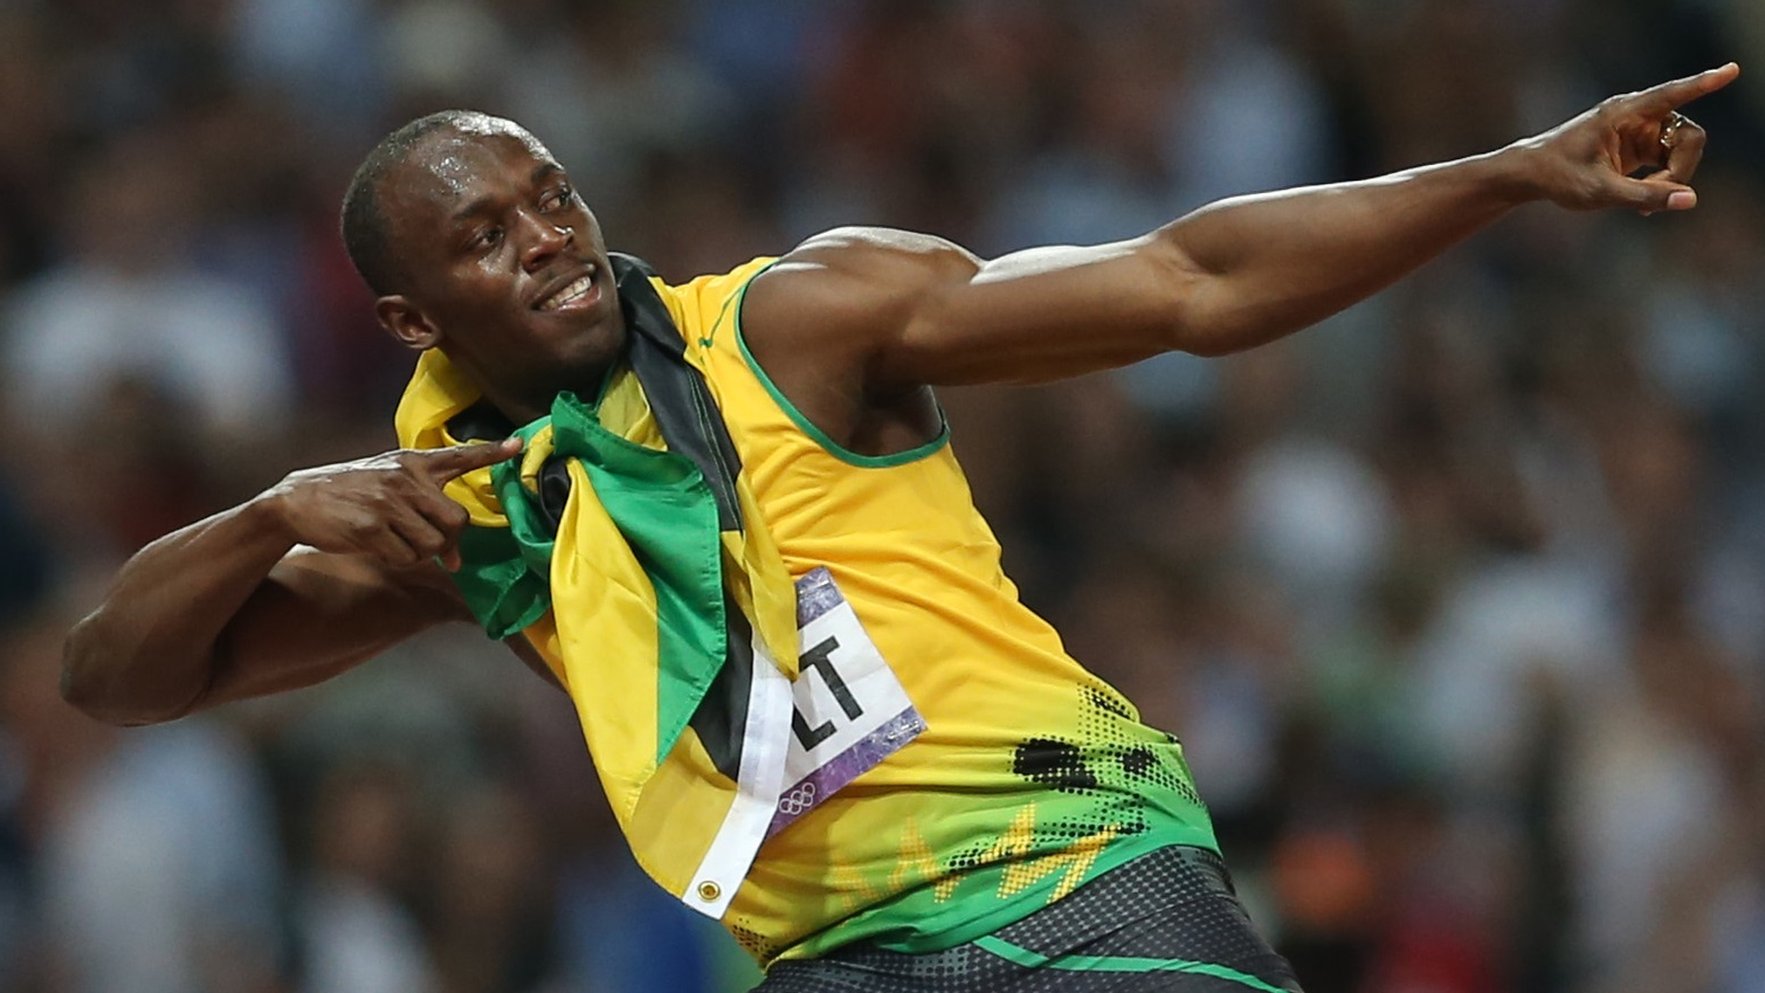 Jamaica Information Service - During the 2012 London Olympic Games, a wax  figure of the world's fastest man and retired Jamaican sprinter, Usain Bolt,  was revealed. Since then it has been put